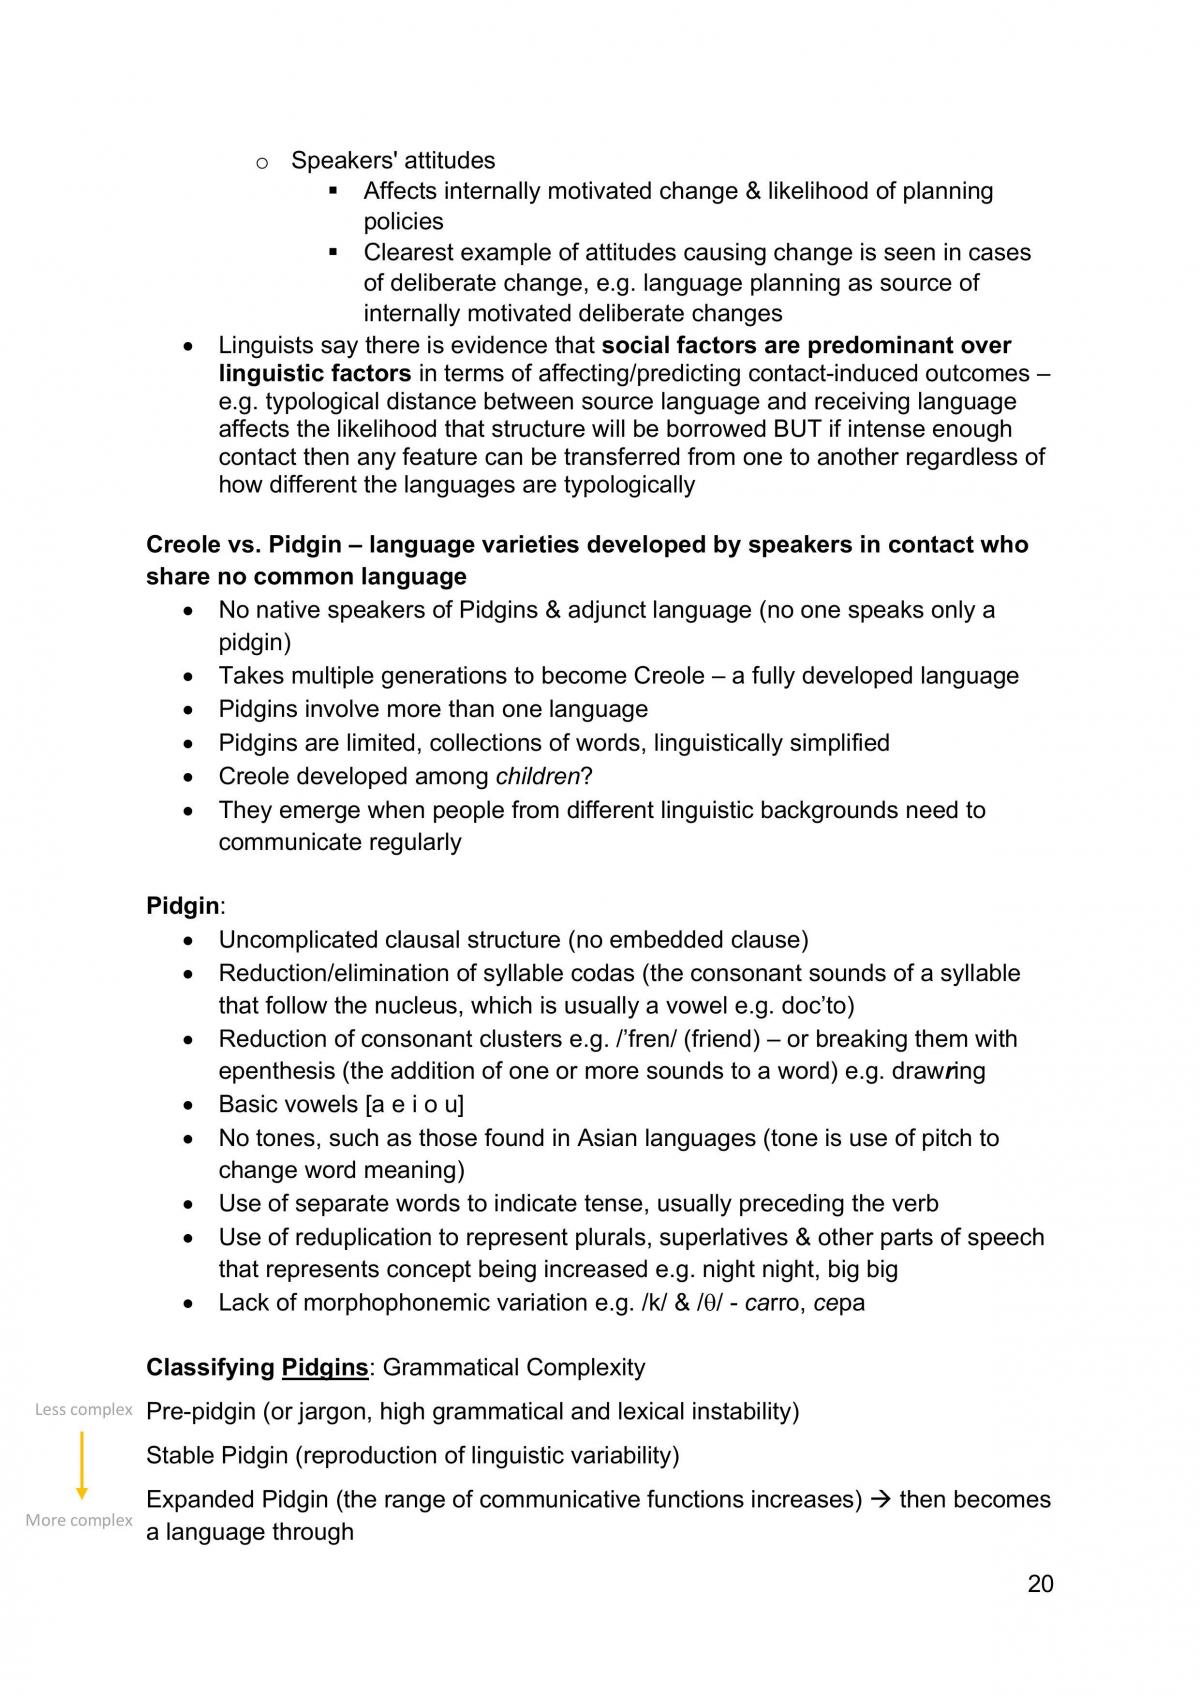 Transnationalism and Linguistic Contact in the Hispanic World Study Notes - Page 20